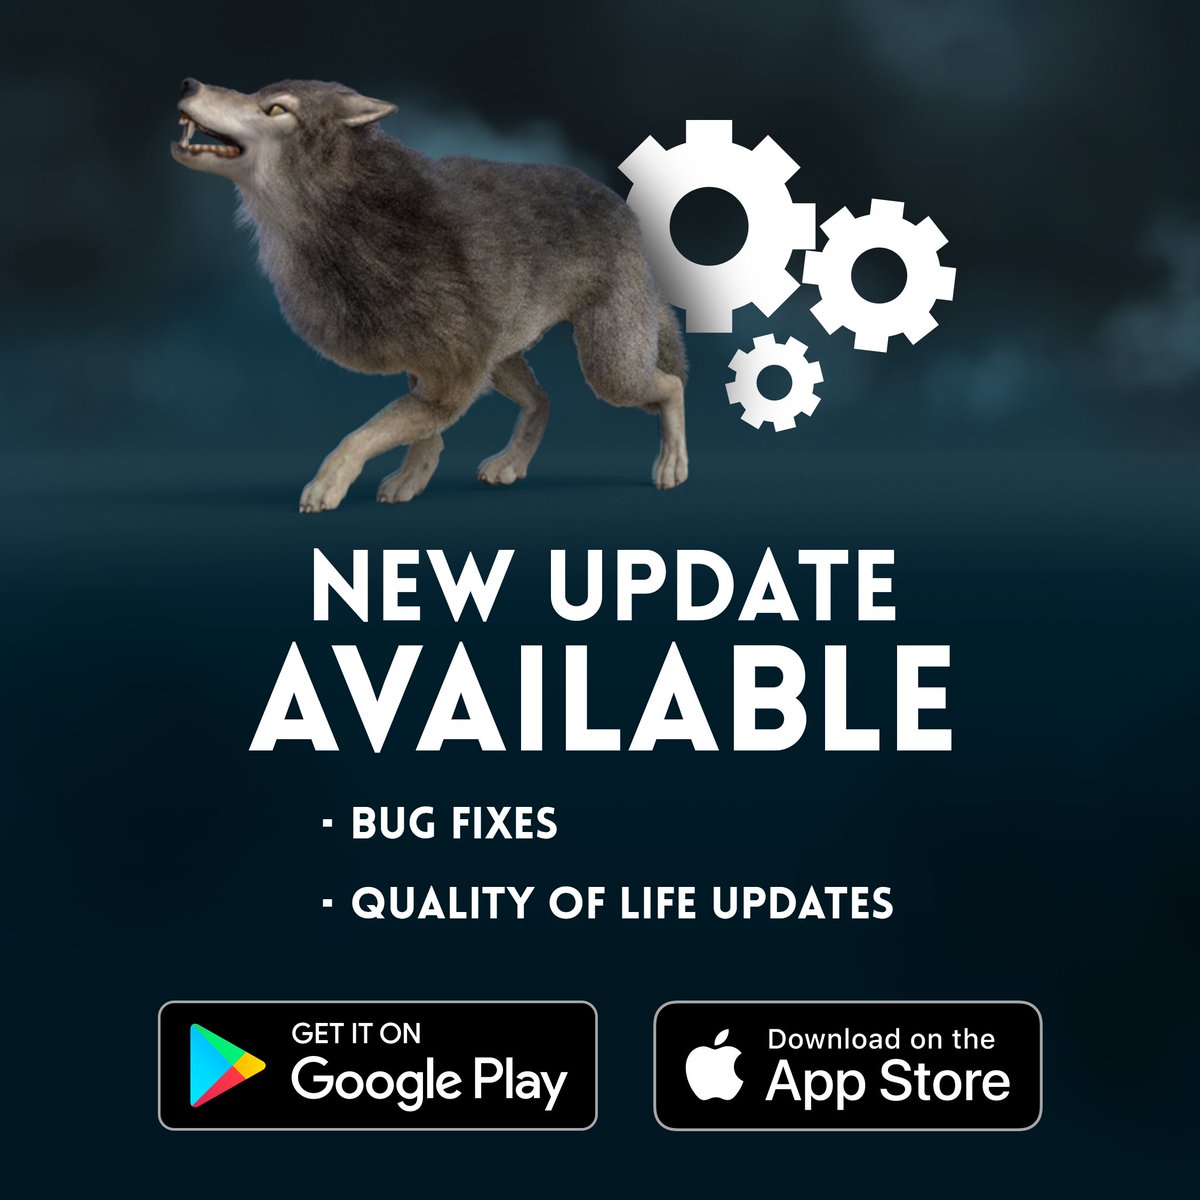 A new update is available for The Wolf! Today features a series of bug fixes and quality of life updates. Make sure you've also joined our discord as we may have something special being announced soon!